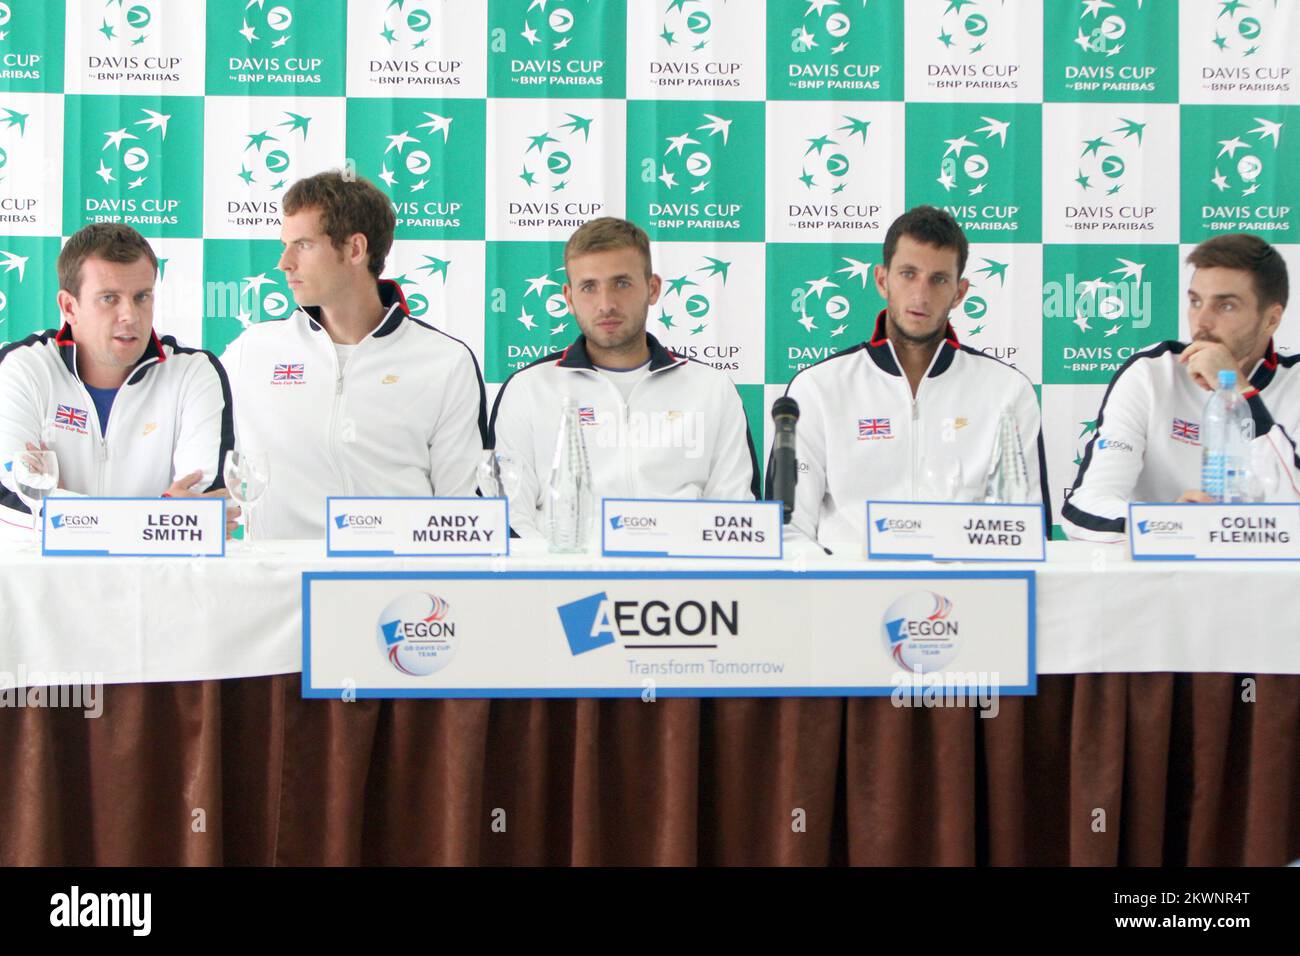 11.09.2013. Croatia, Umag - Press conference of British tennis team ahead of Davis Cup which is due to bad weather delayed more than an hour. Andy Murray, Coling Fleming, Leon Smith, Dave Evans, James Ward.  Photo: Nel Pavletic/PIXSELL Stock Photo